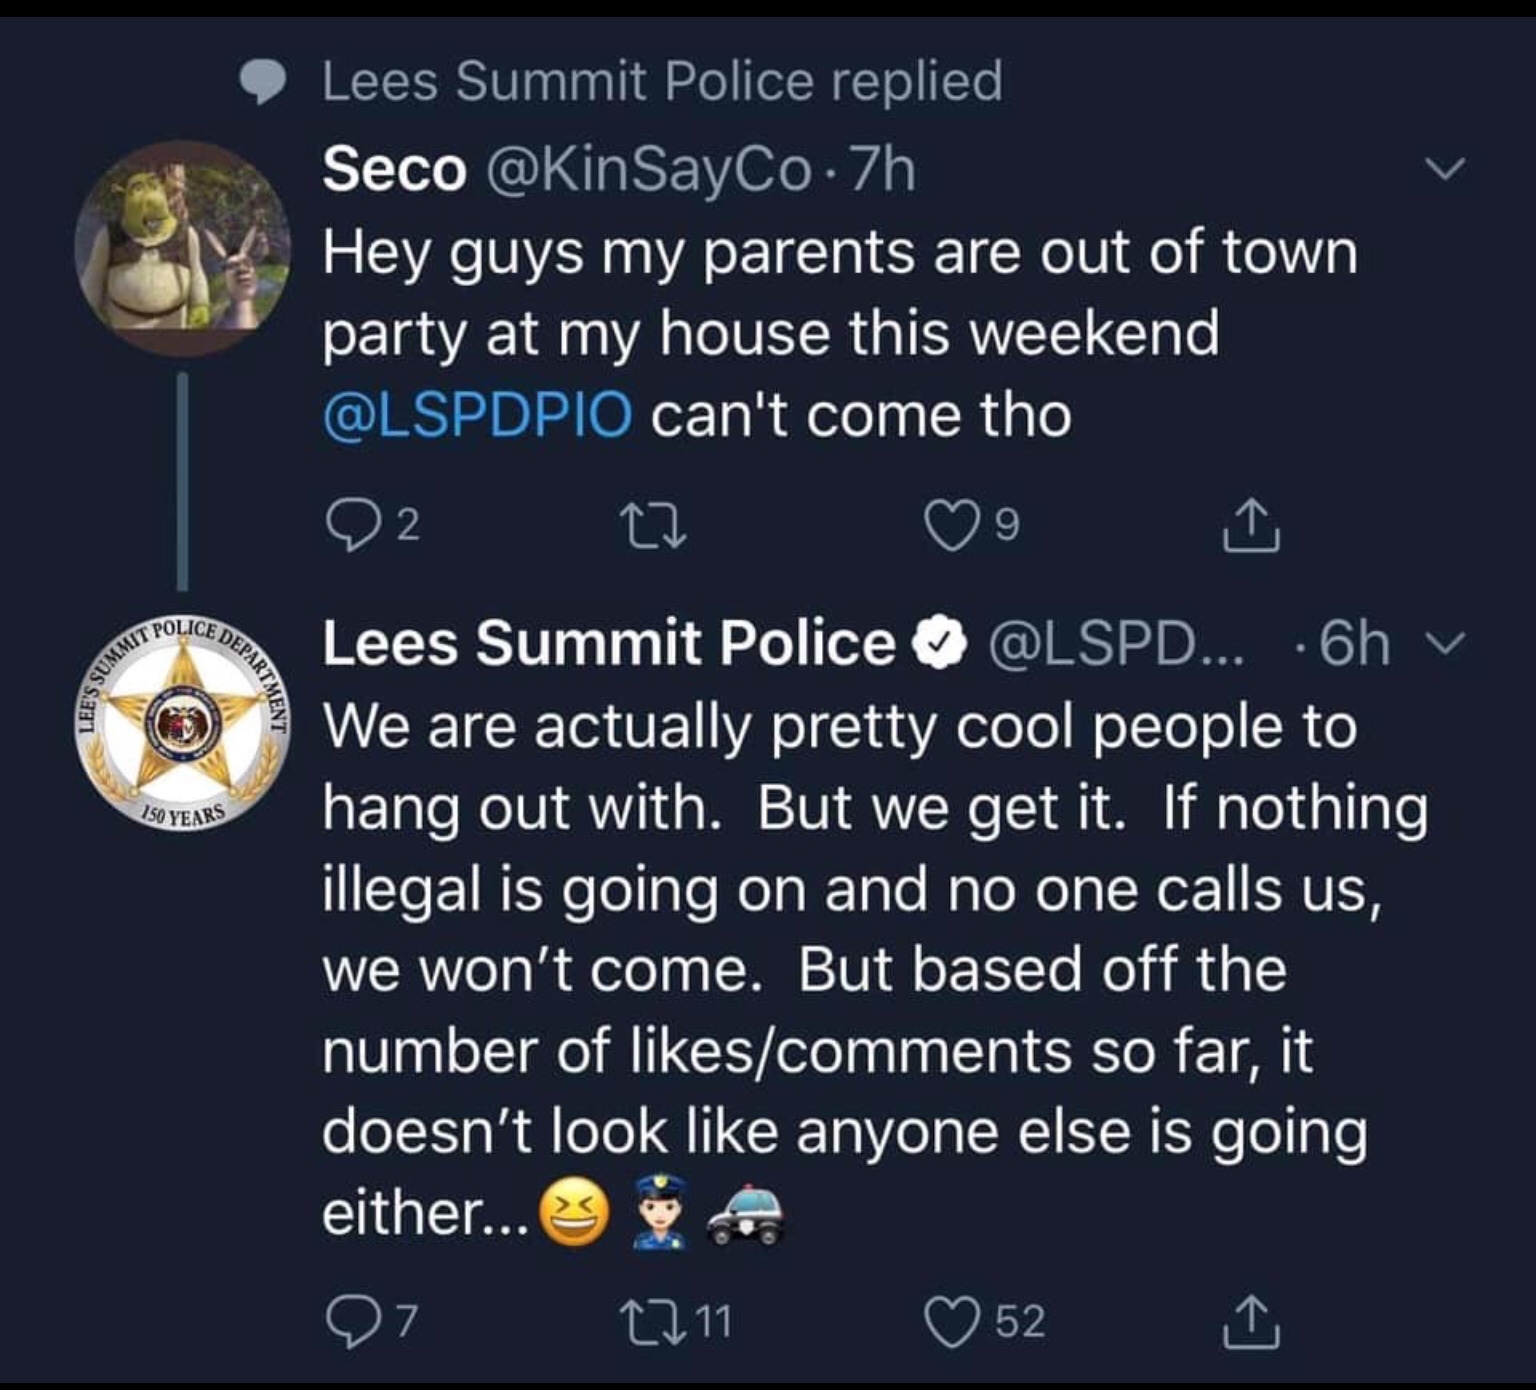 atmosphere - Police Ce Depar Summit Lee'S Se Artment Lees Summit Police replied Seco .7h Hey guys my parents are out of town party at my house this weekend can't come tho 22 12 09 Lees Summit Police ... .6h v We are actually pretty cool people to hang out